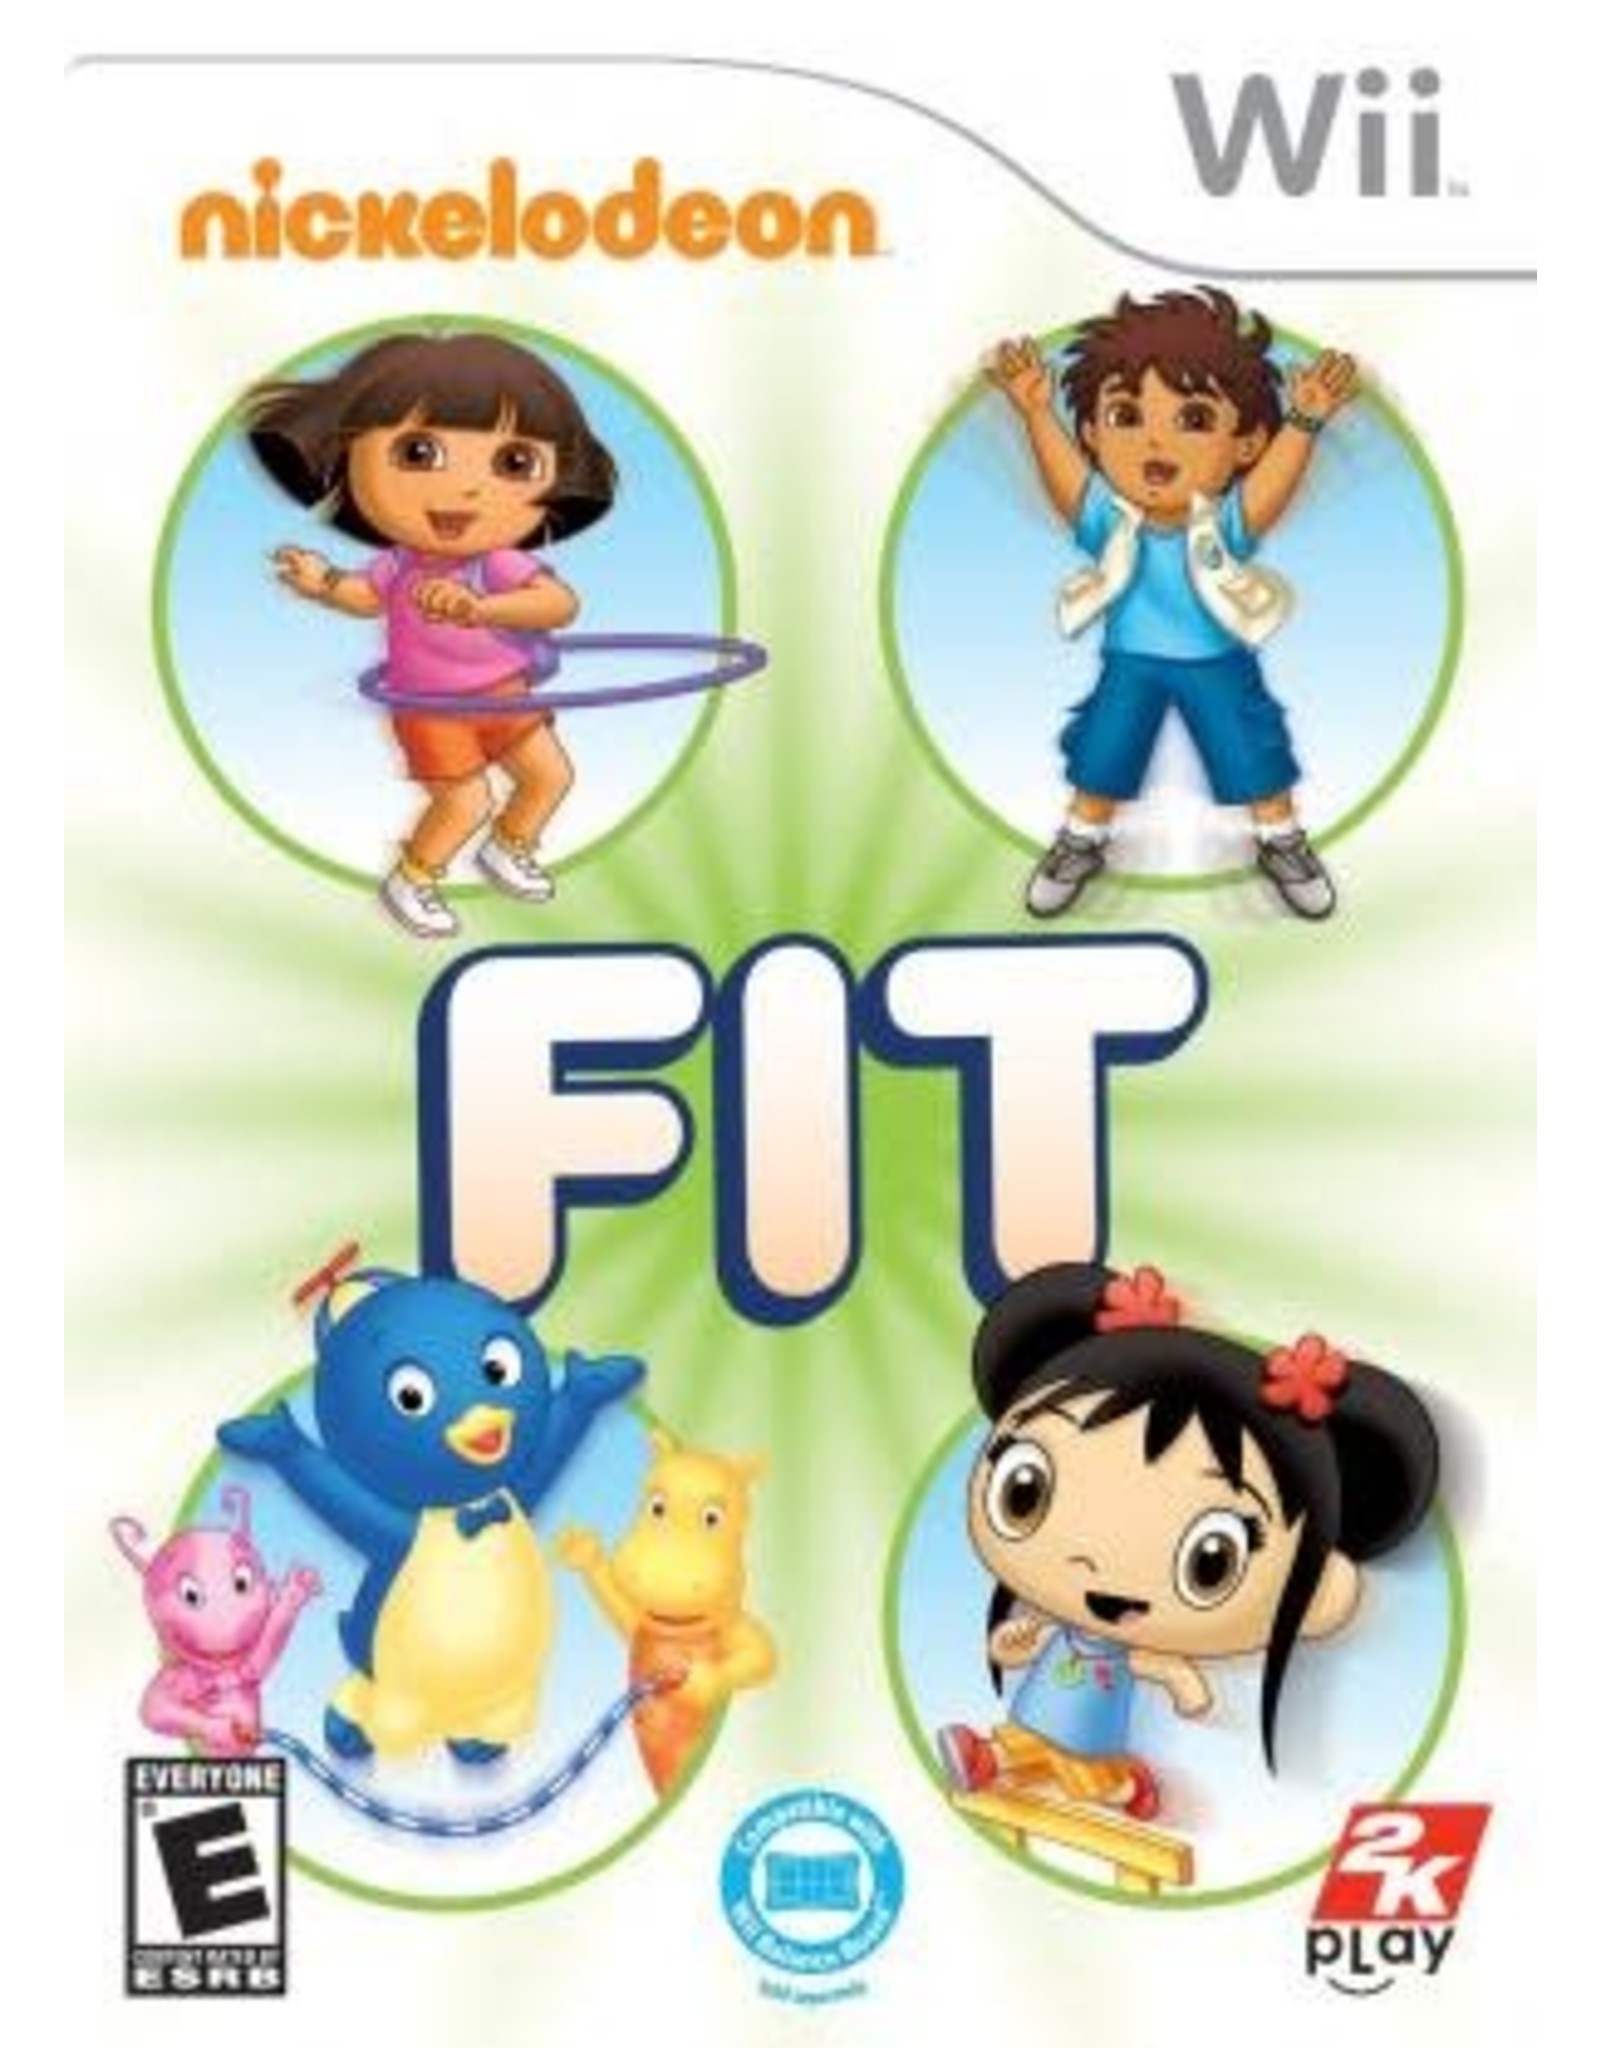 Wii Nickelodeon Fit (Brand New)